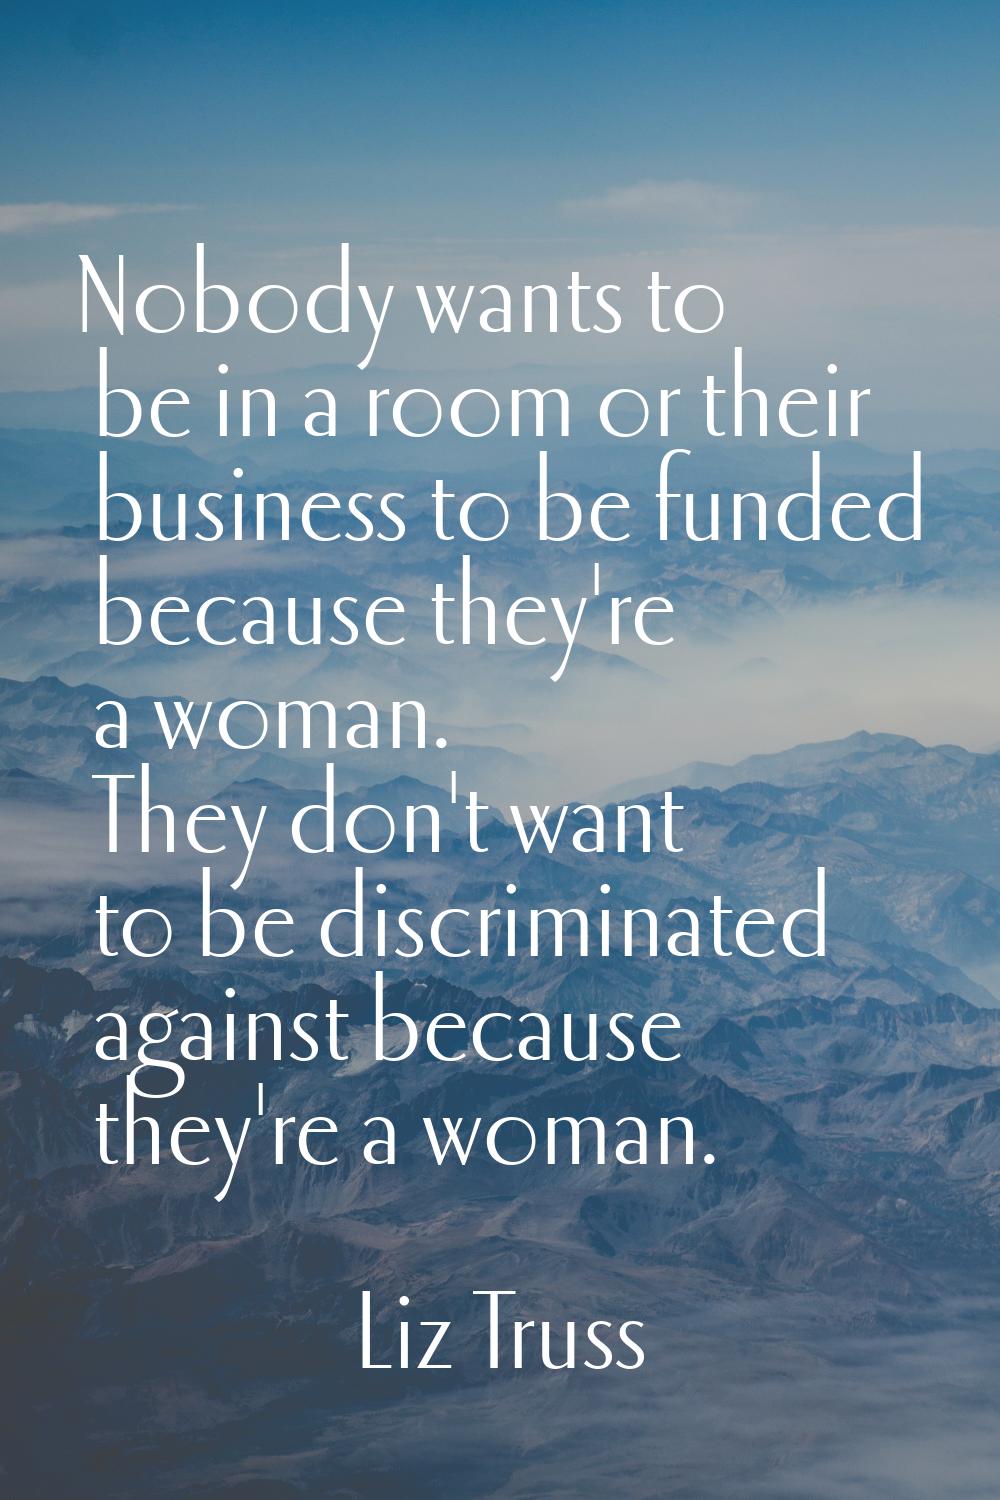 Nobody wants to be in a room or their business to be funded because they're a woman. They don't wan